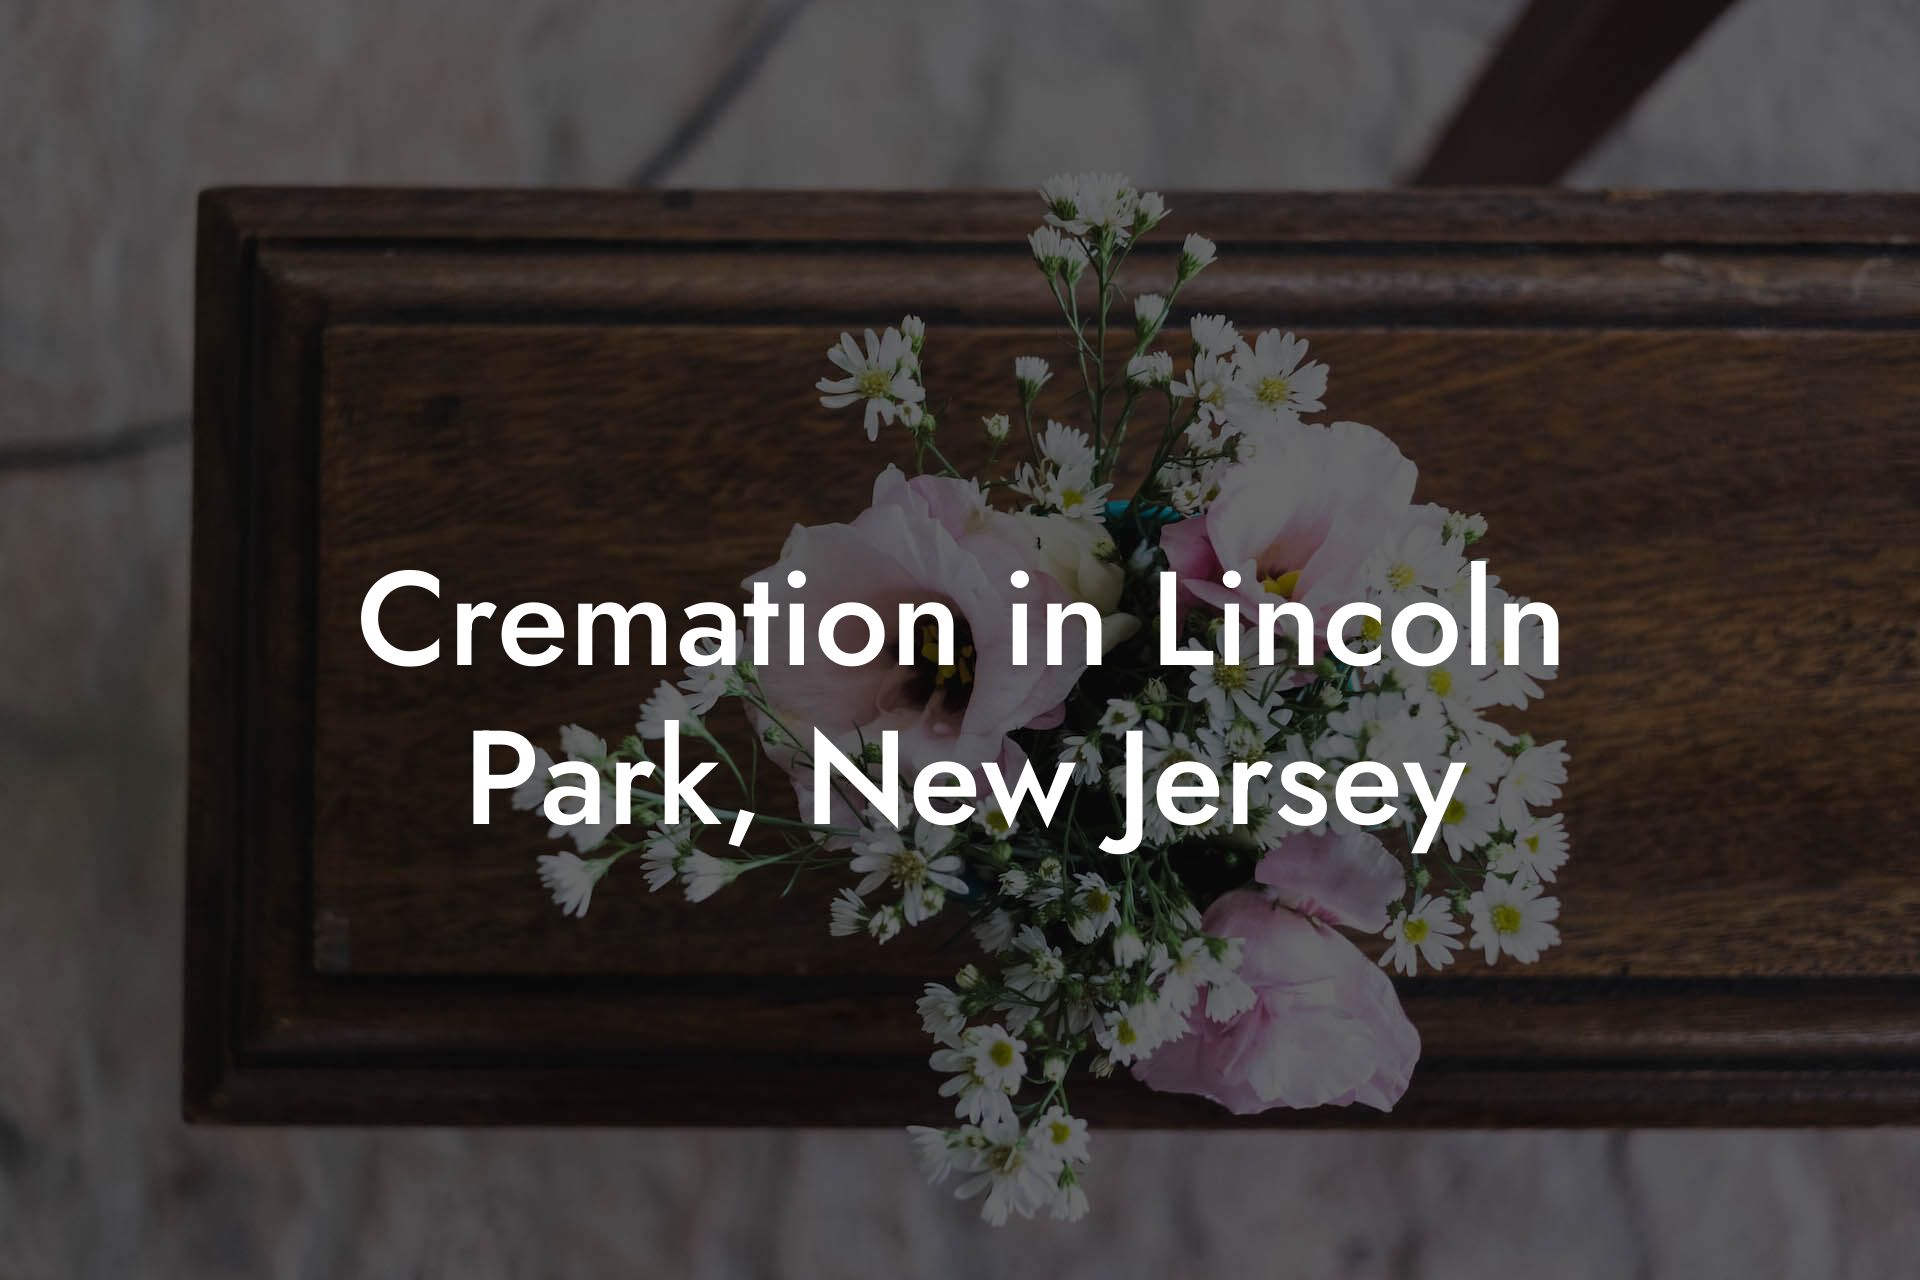 Cremation in Lincoln Park, New Jersey